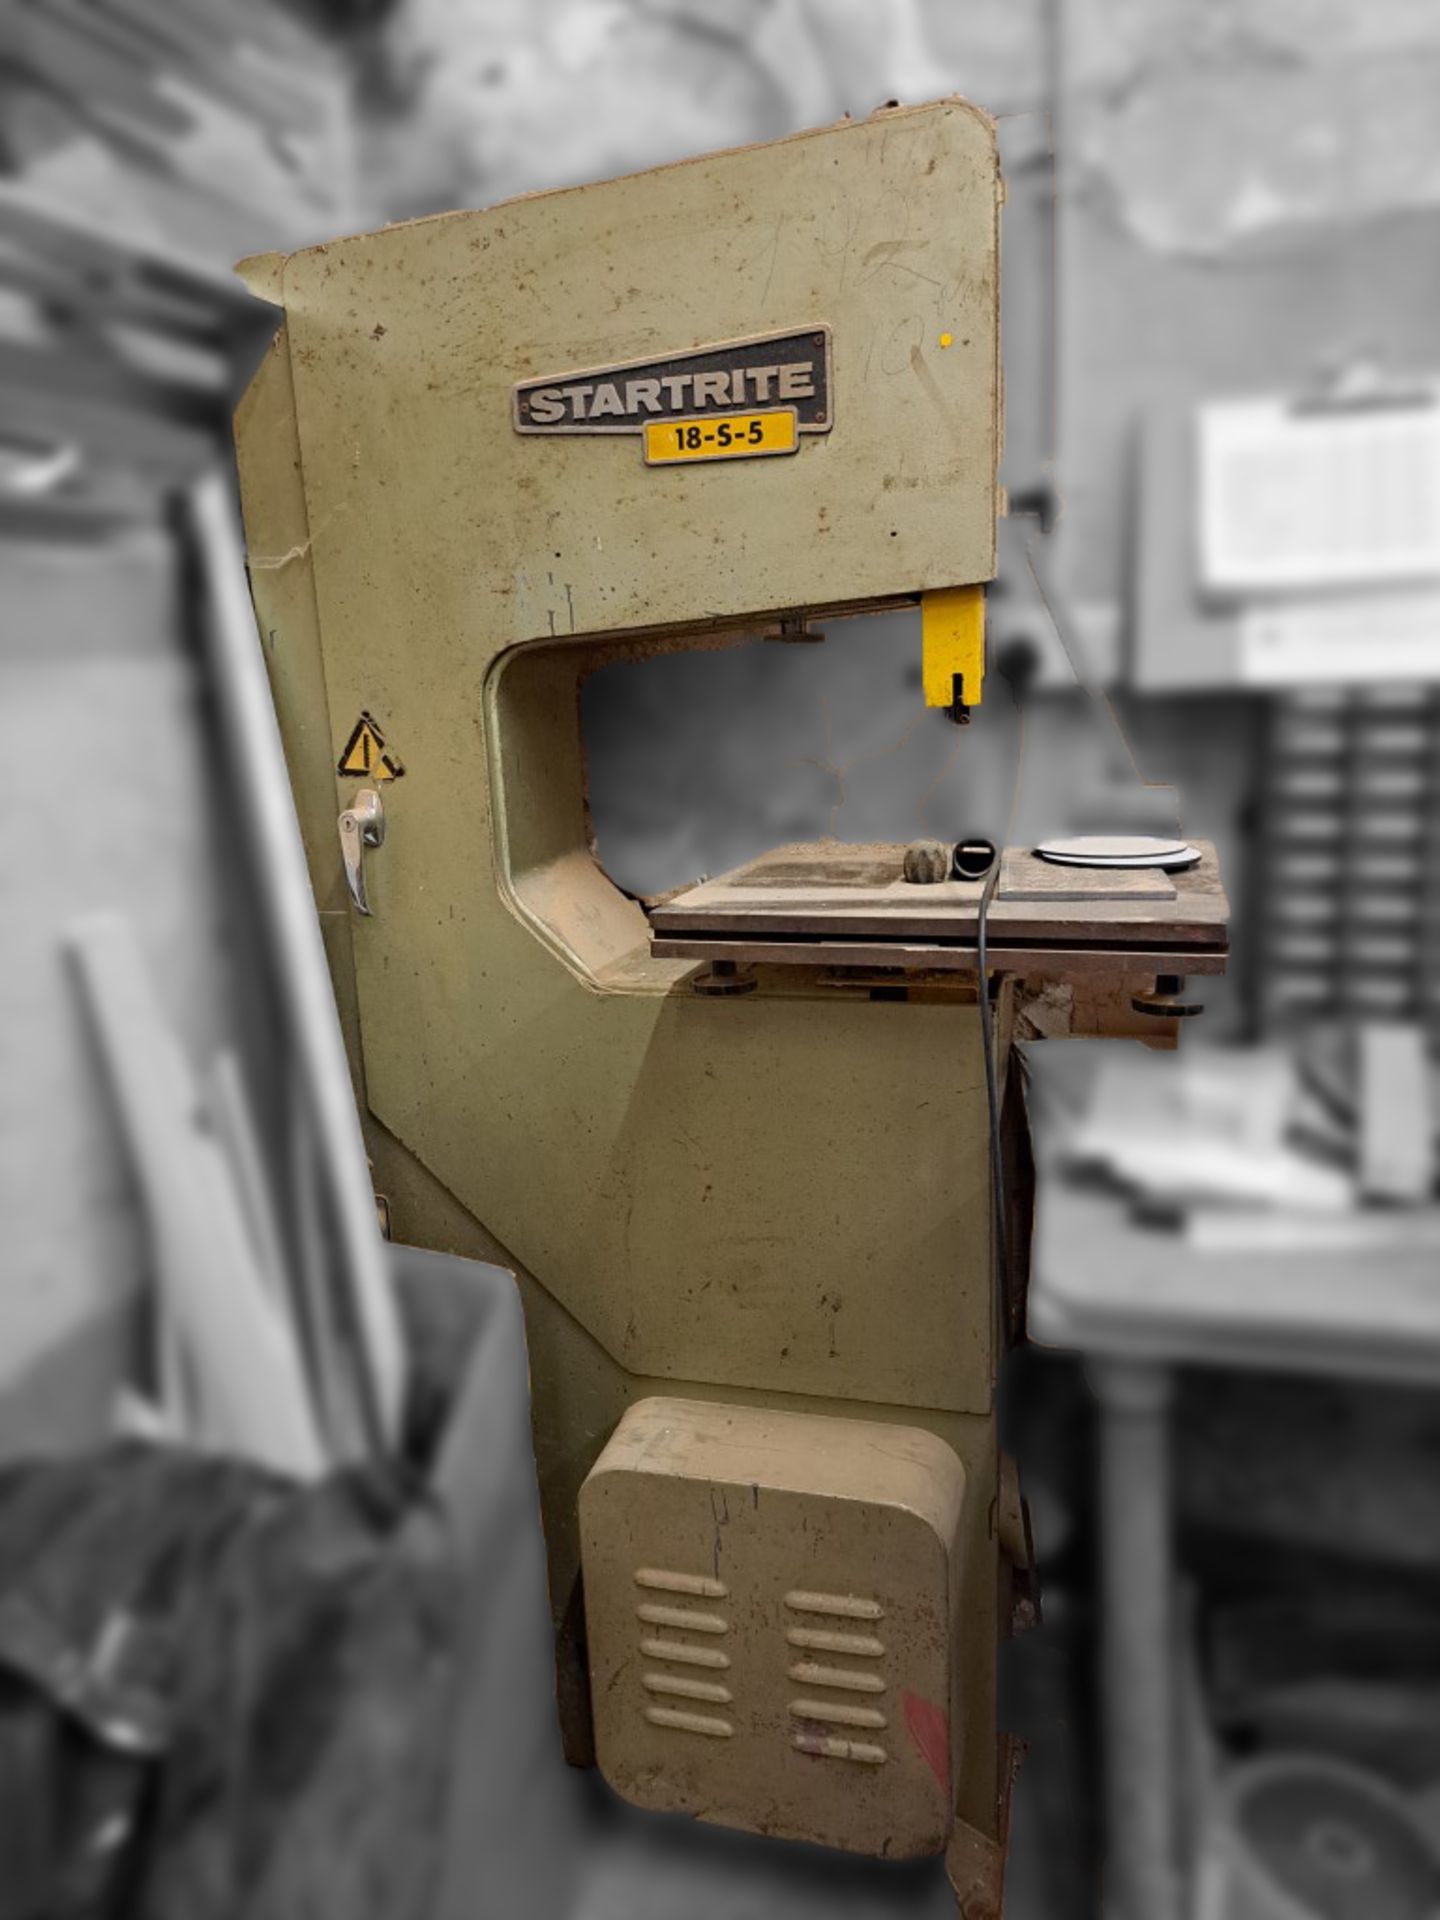 Startrite 18-S-5 Bandsaw with Deep Throat